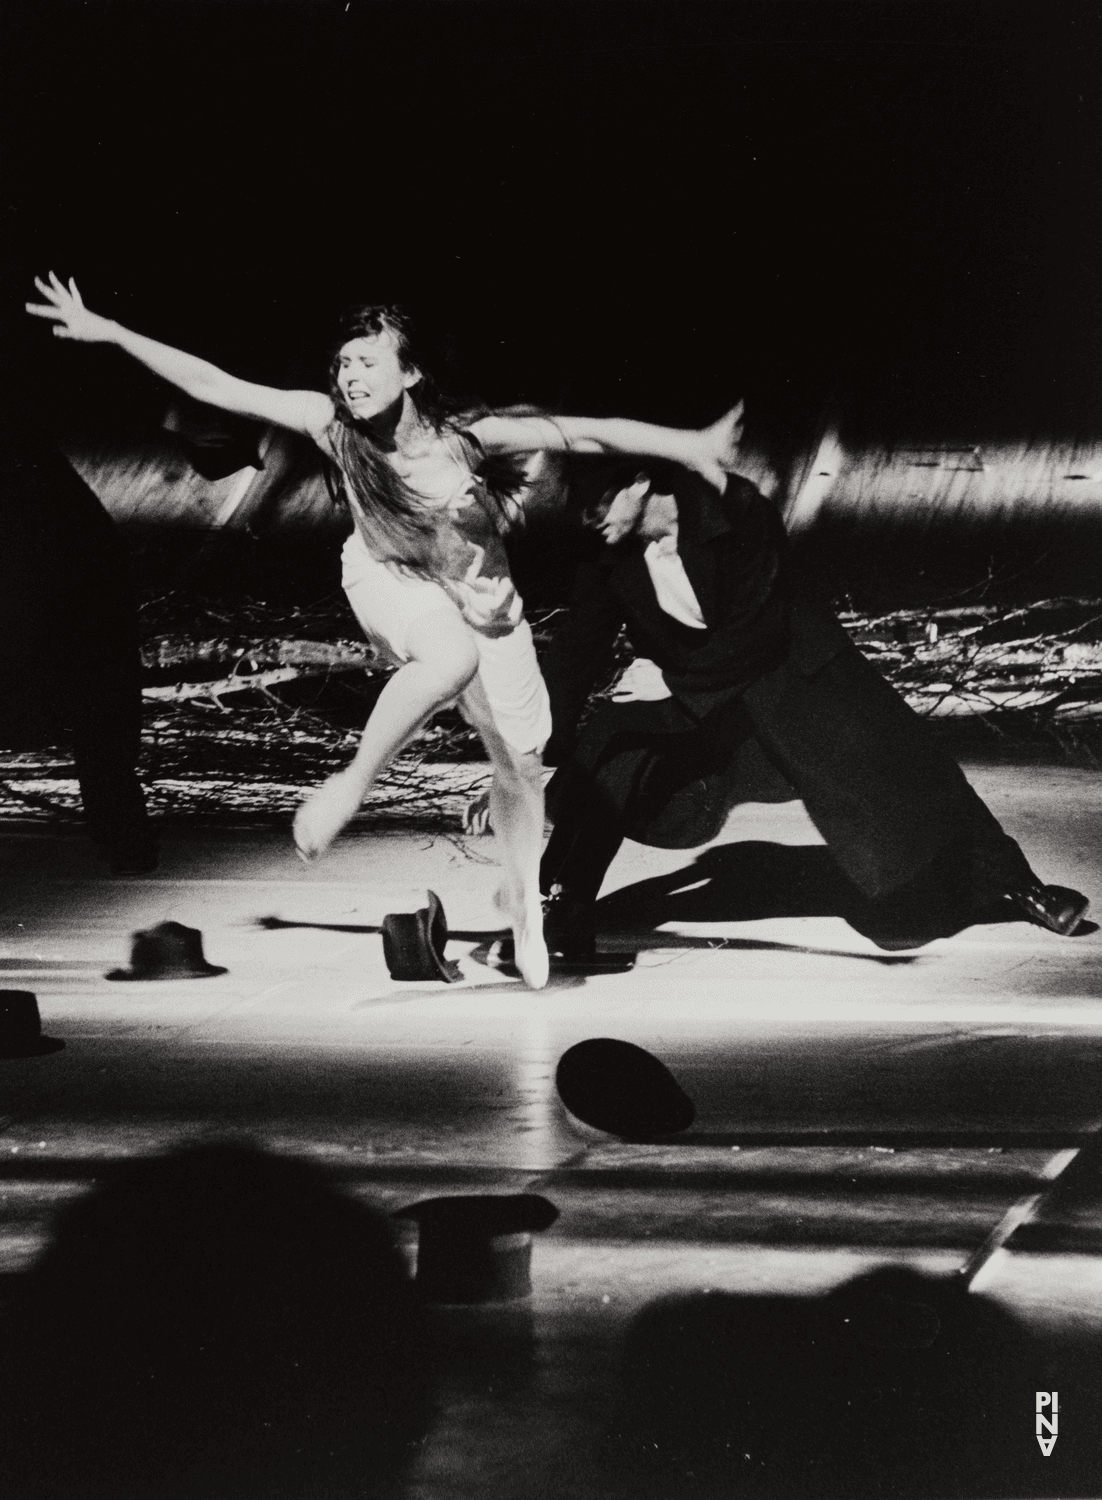 Josephine Ann Endicott in “Come Dance With Me” by Pina Bausch